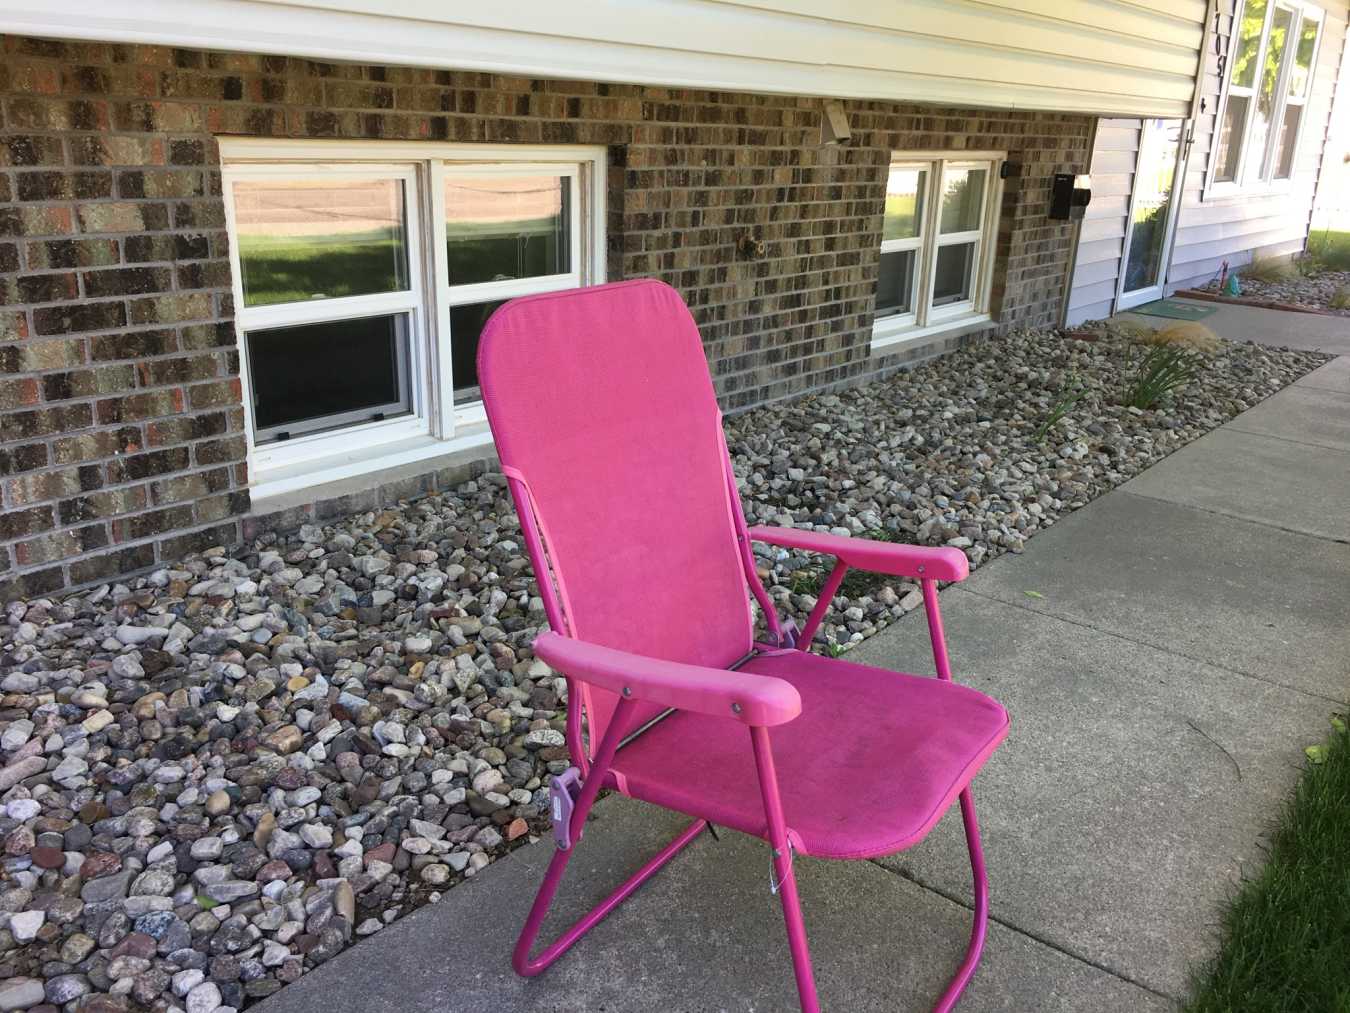 Pull up a Lawn Chair, Meet Your Neighbors